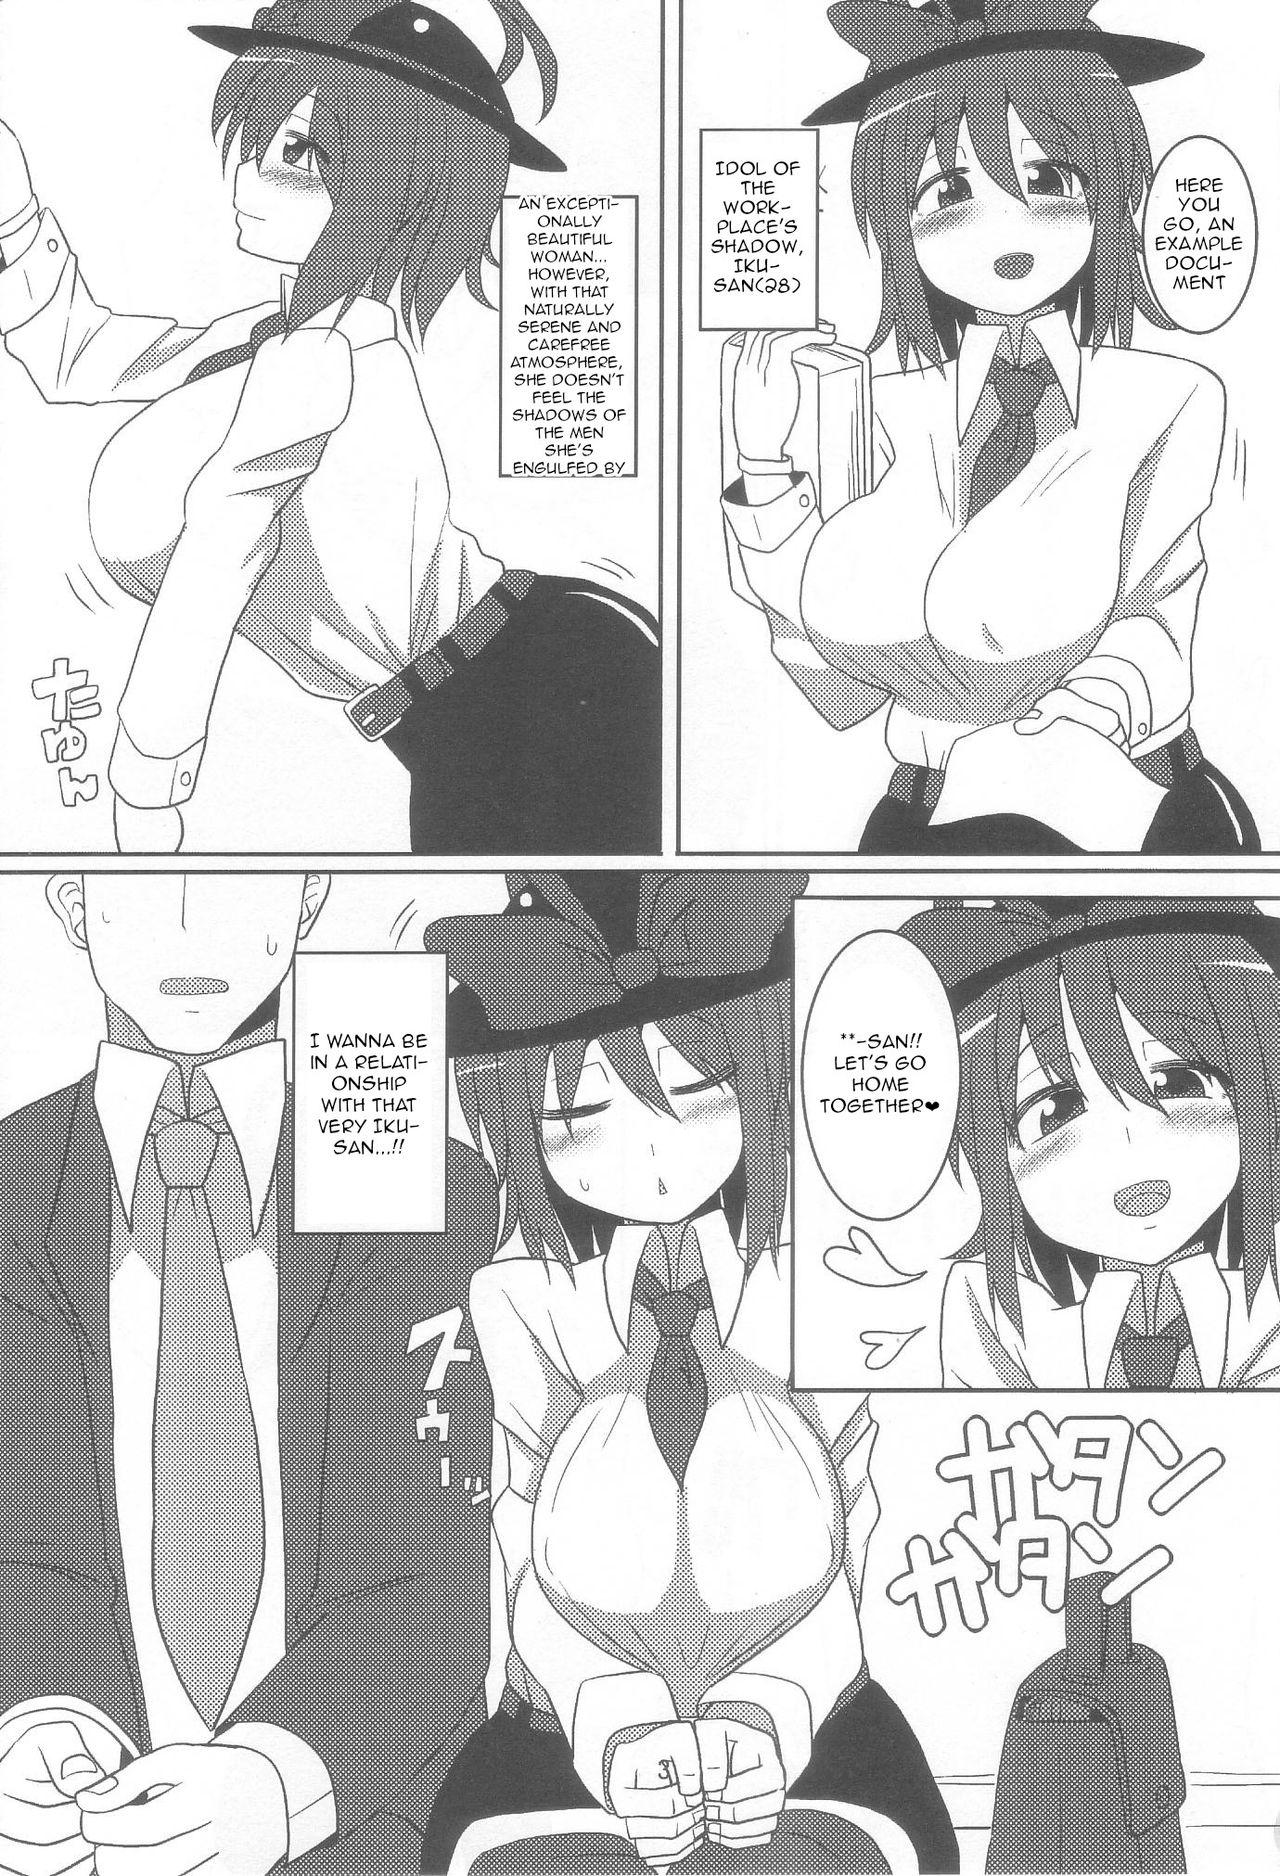 Best Blow Jobs Ever OL Ryuugyo no Tanezuke Nikki - Touhou project Missionary Porn - Page 3